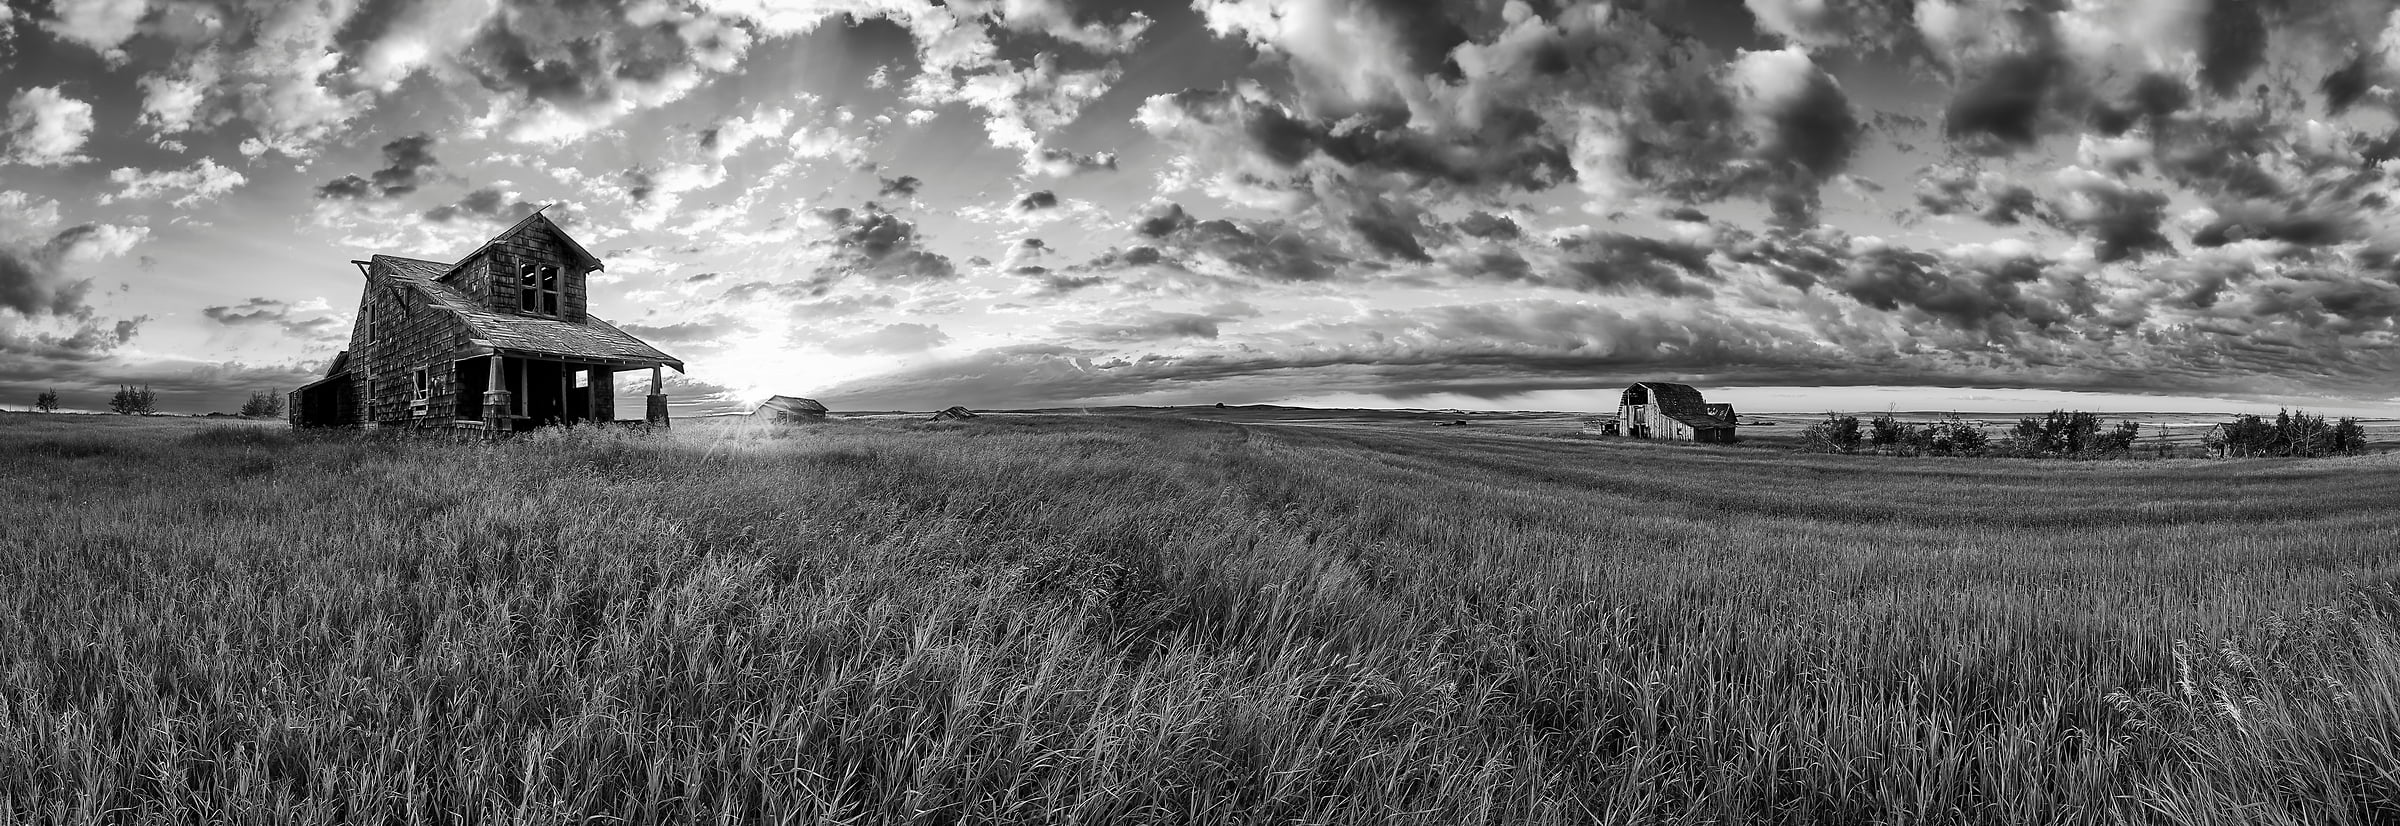 93 megapixels! A very high resolution, large-format VAST photo of farmland, grasslands, the prairie, and an old abandoned house; fine art black and white landscape photo created at sunrise by Scott Dimond on the Great Plains in Alberta, Canada.